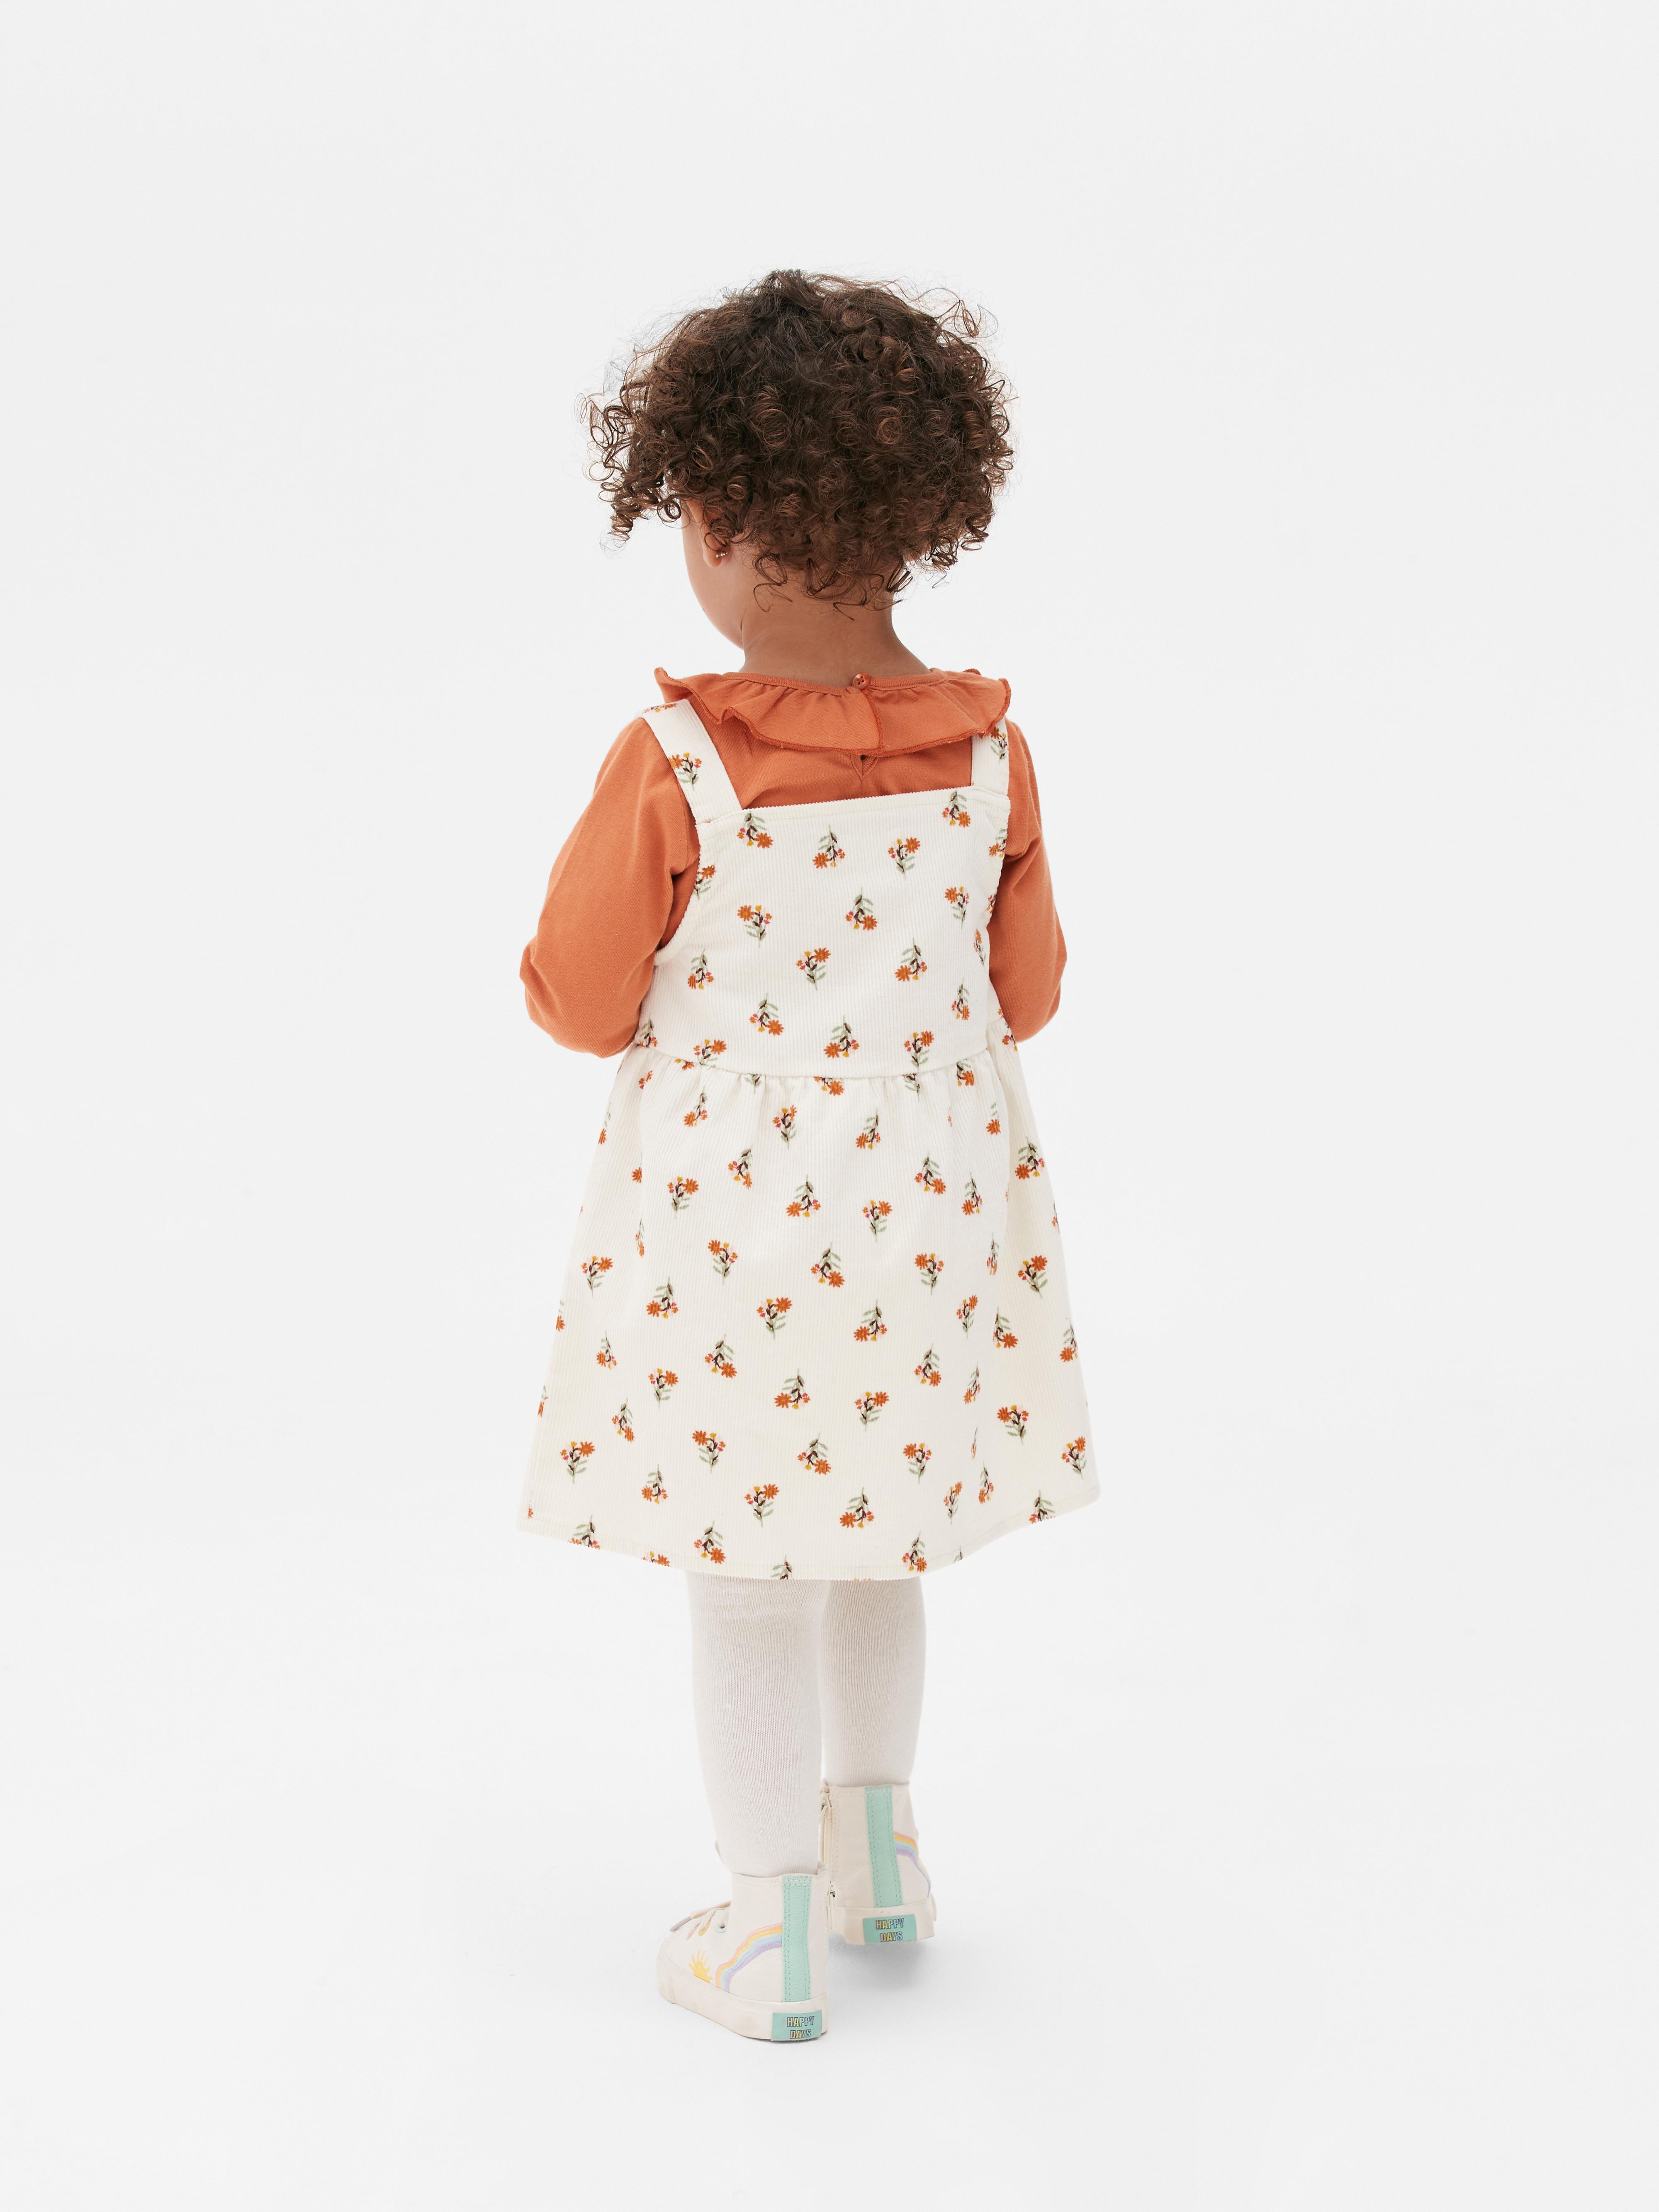 Corduroy Pinny Dress and Frilly T-shirt Set